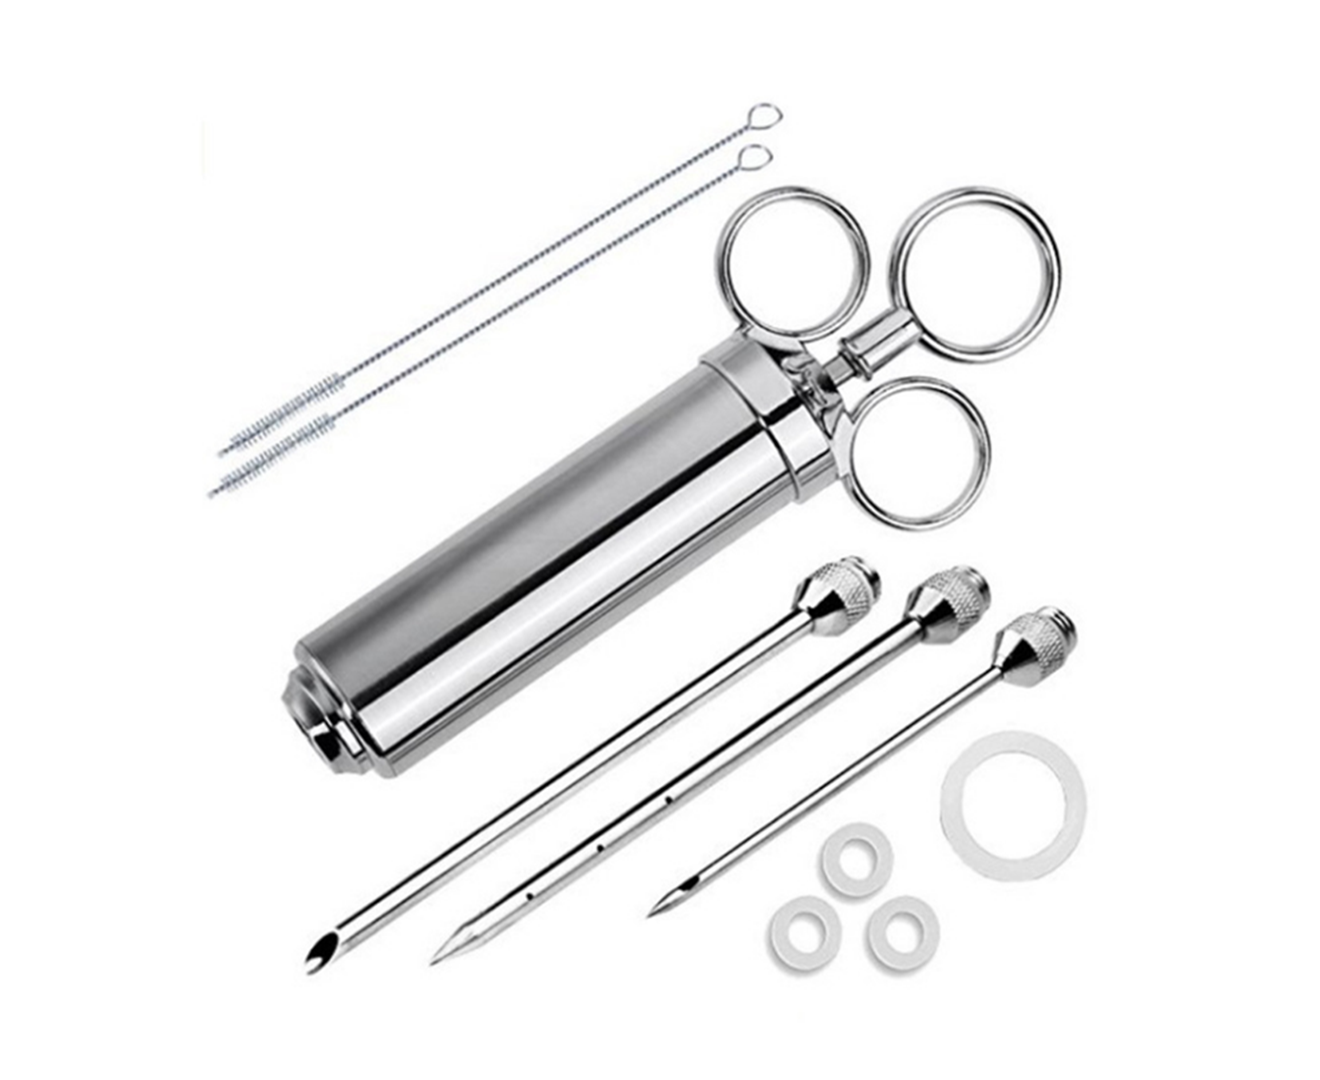 Three-needle Stainless Steel Meat Syringe with Cleaning Brush